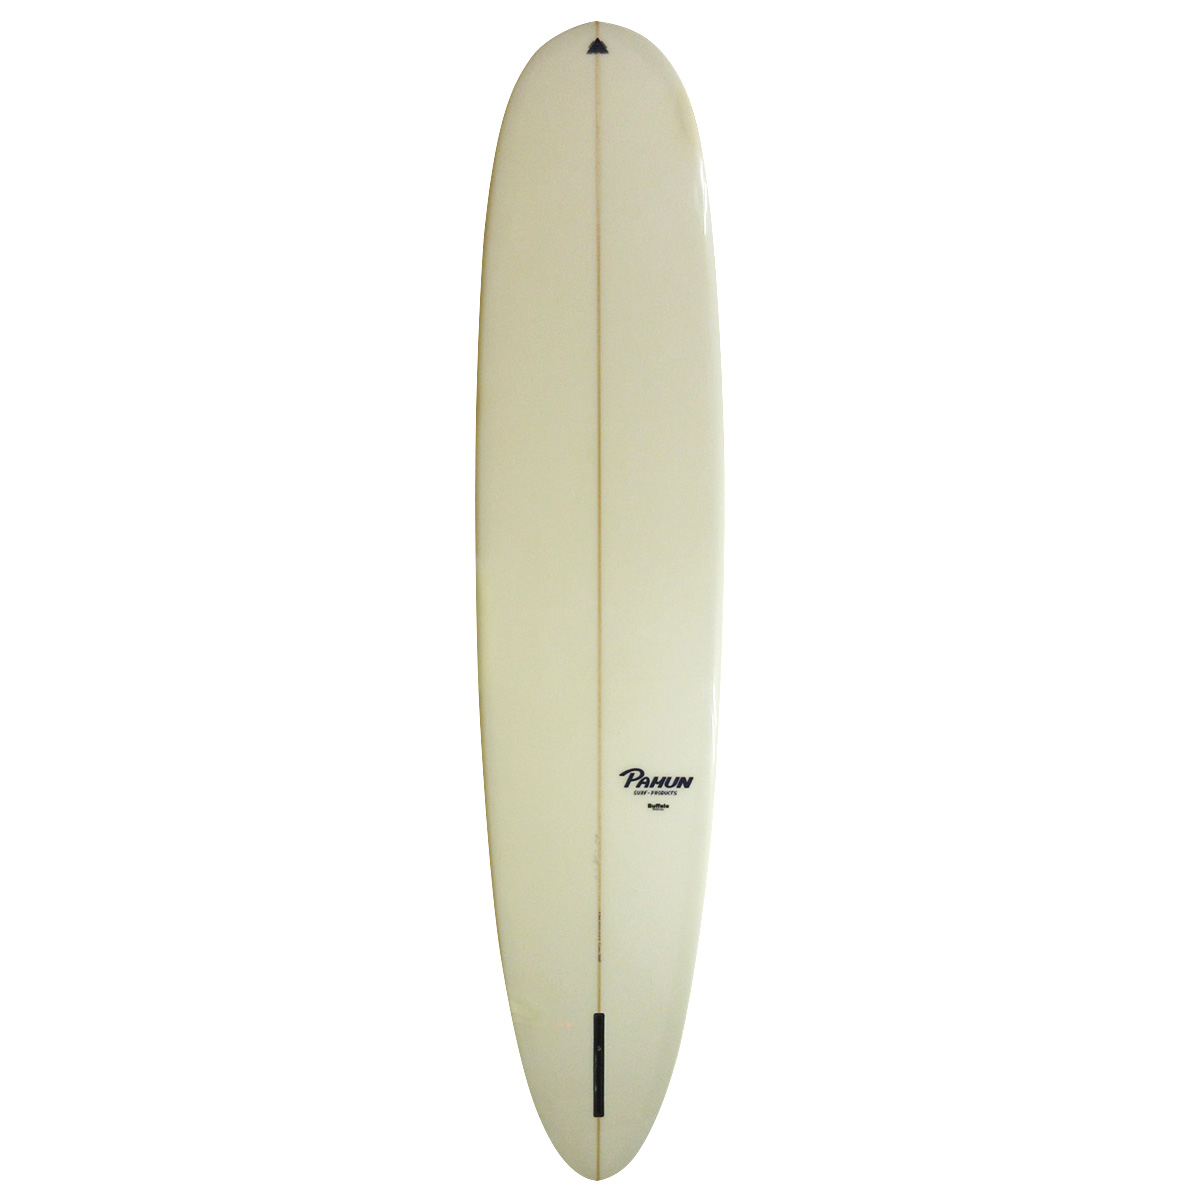 PAMUN SURF PRODUCTS / ALL ROUNDER 9`0